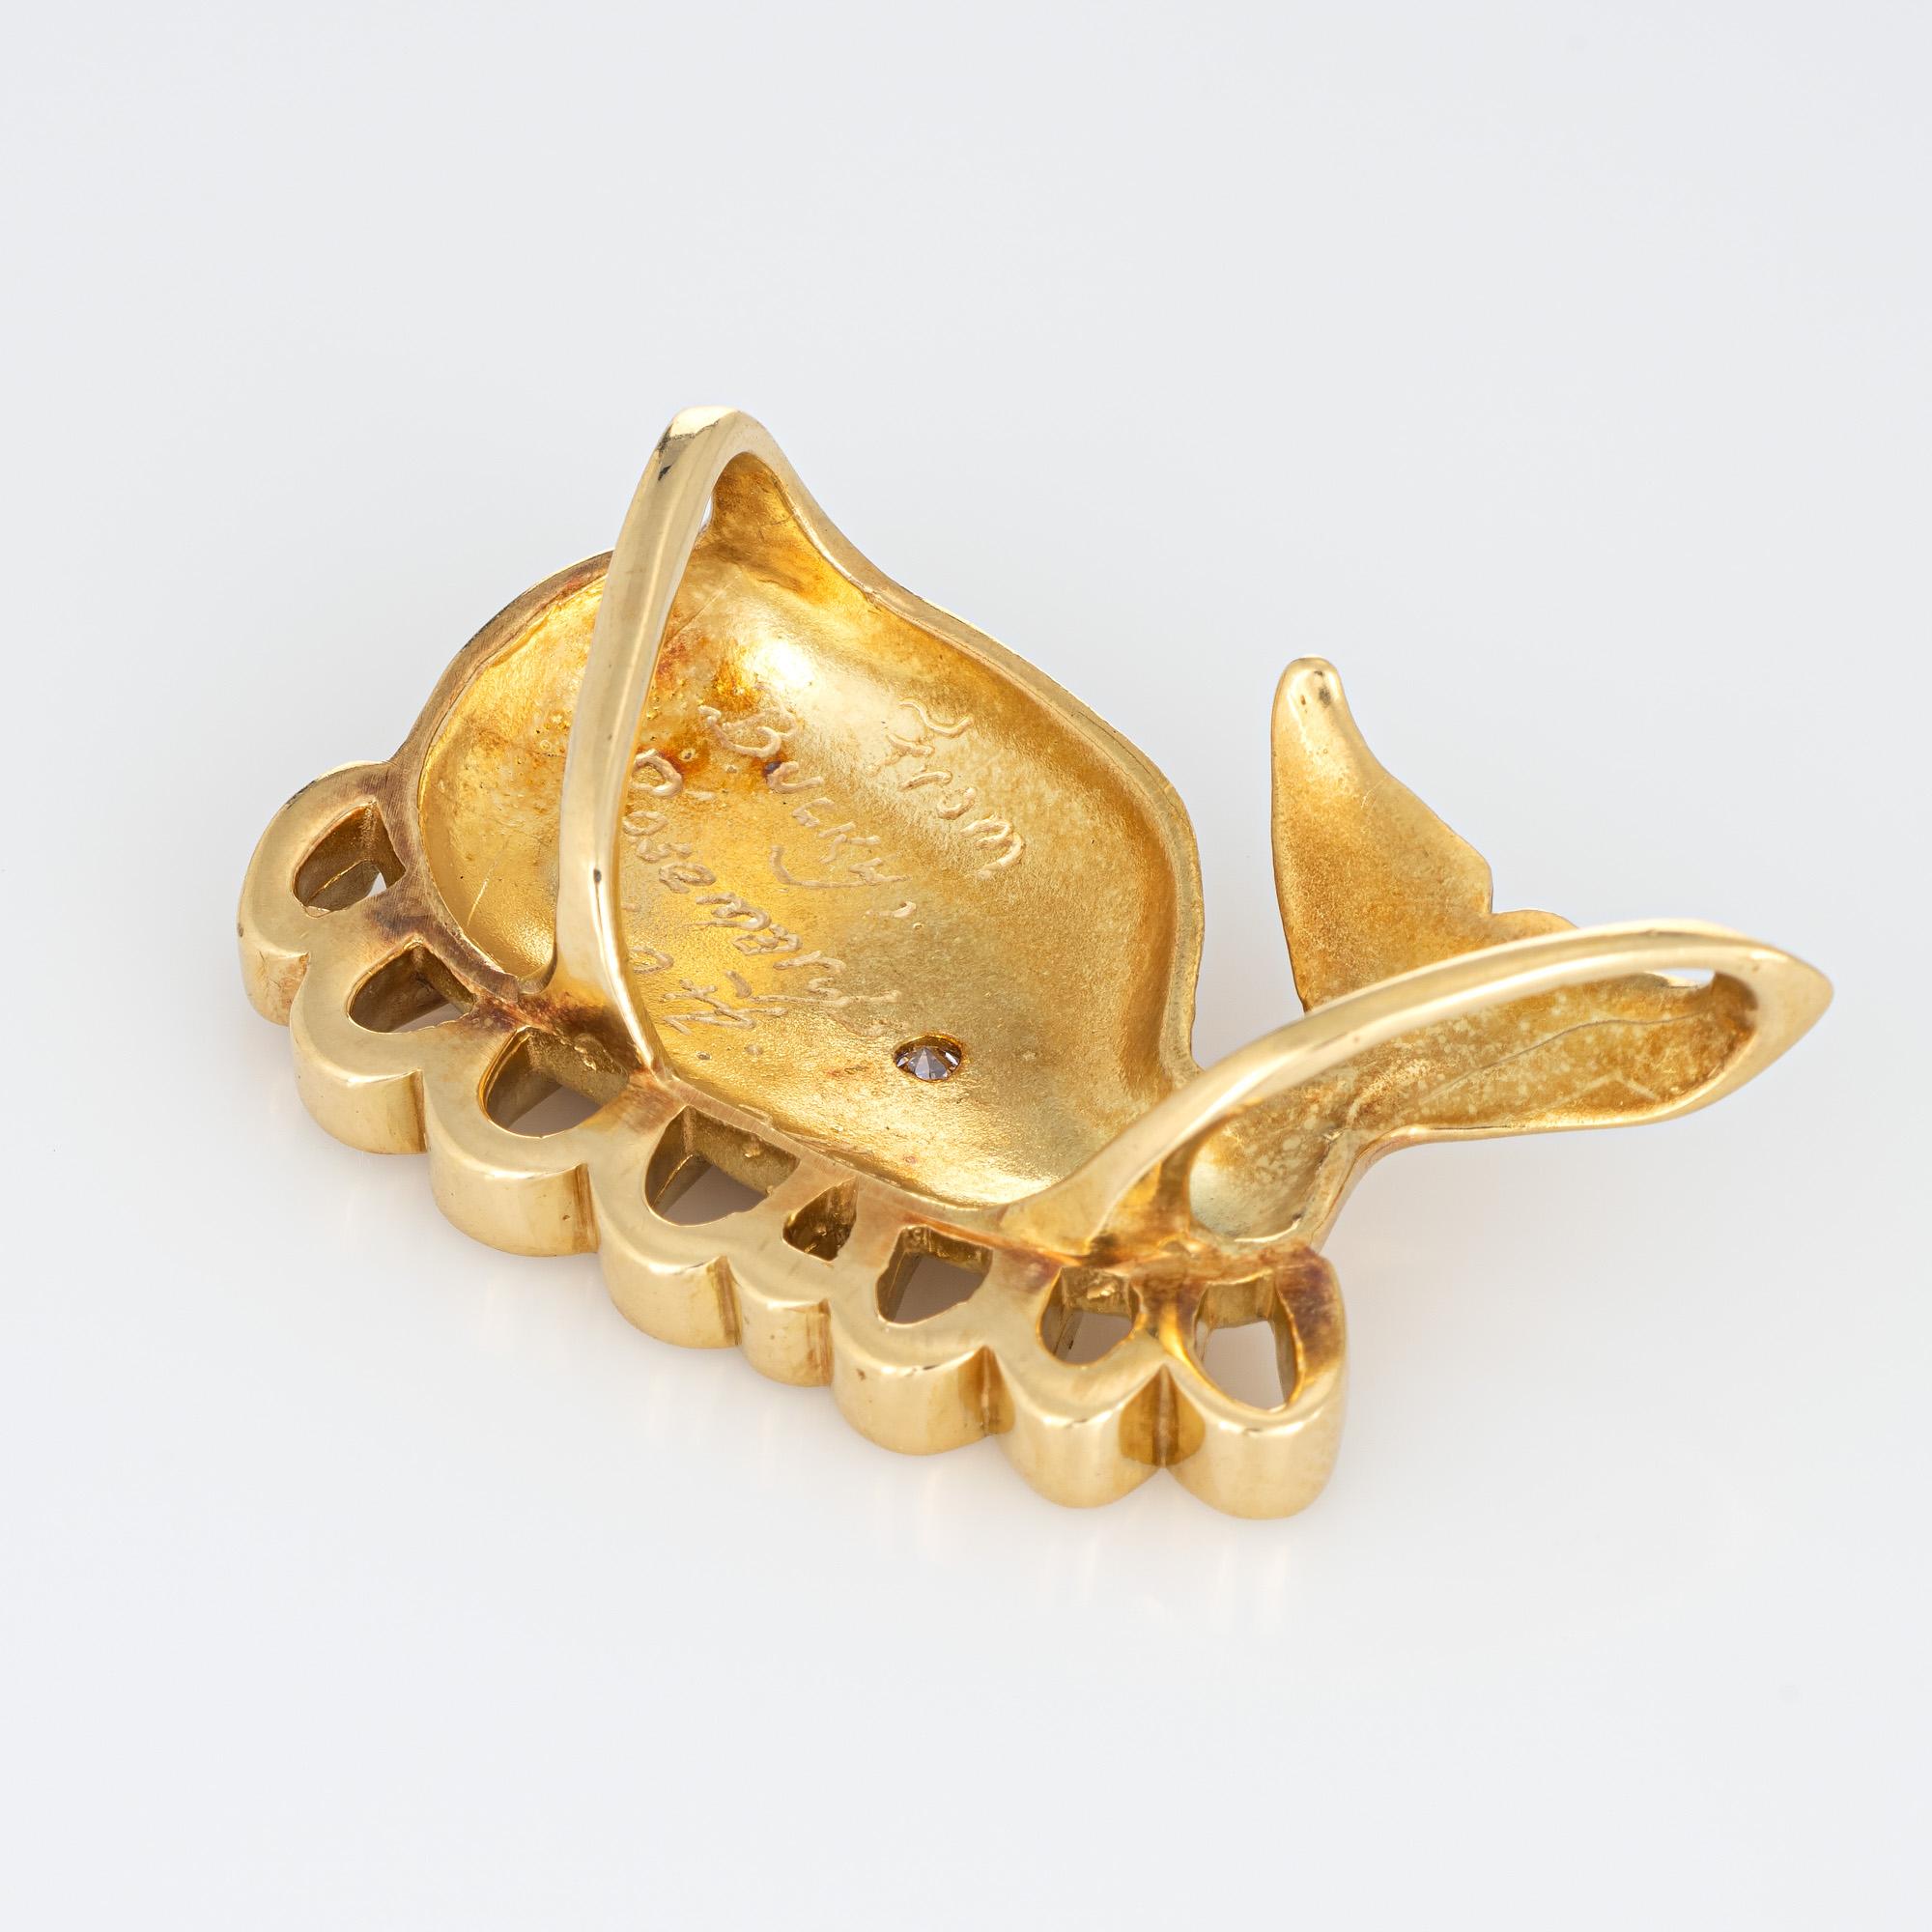 Finely detailed vintage whale pendant (enhancer) crafted in 18k yellow gold.  

One estimated 0.05 carat diamond is estimated at H-I color and VS2 clarity.

The unique pendant features a whale with wave detail to the base. The pendant features a